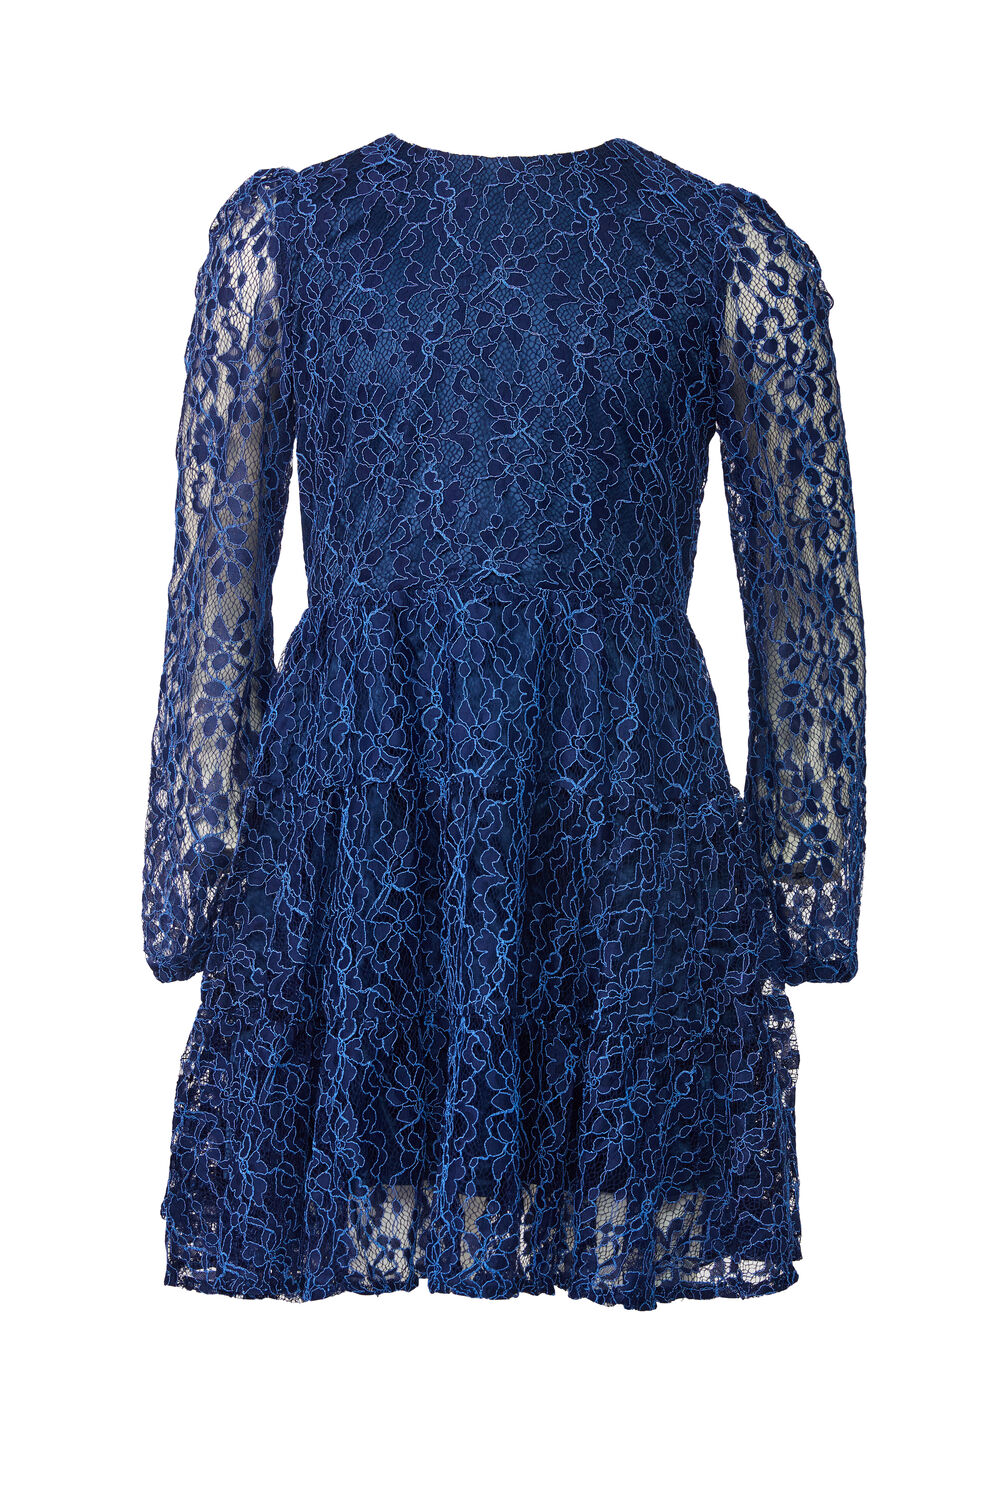 SIENNA TIERED LACE DRESS in colour BLACK IRIS